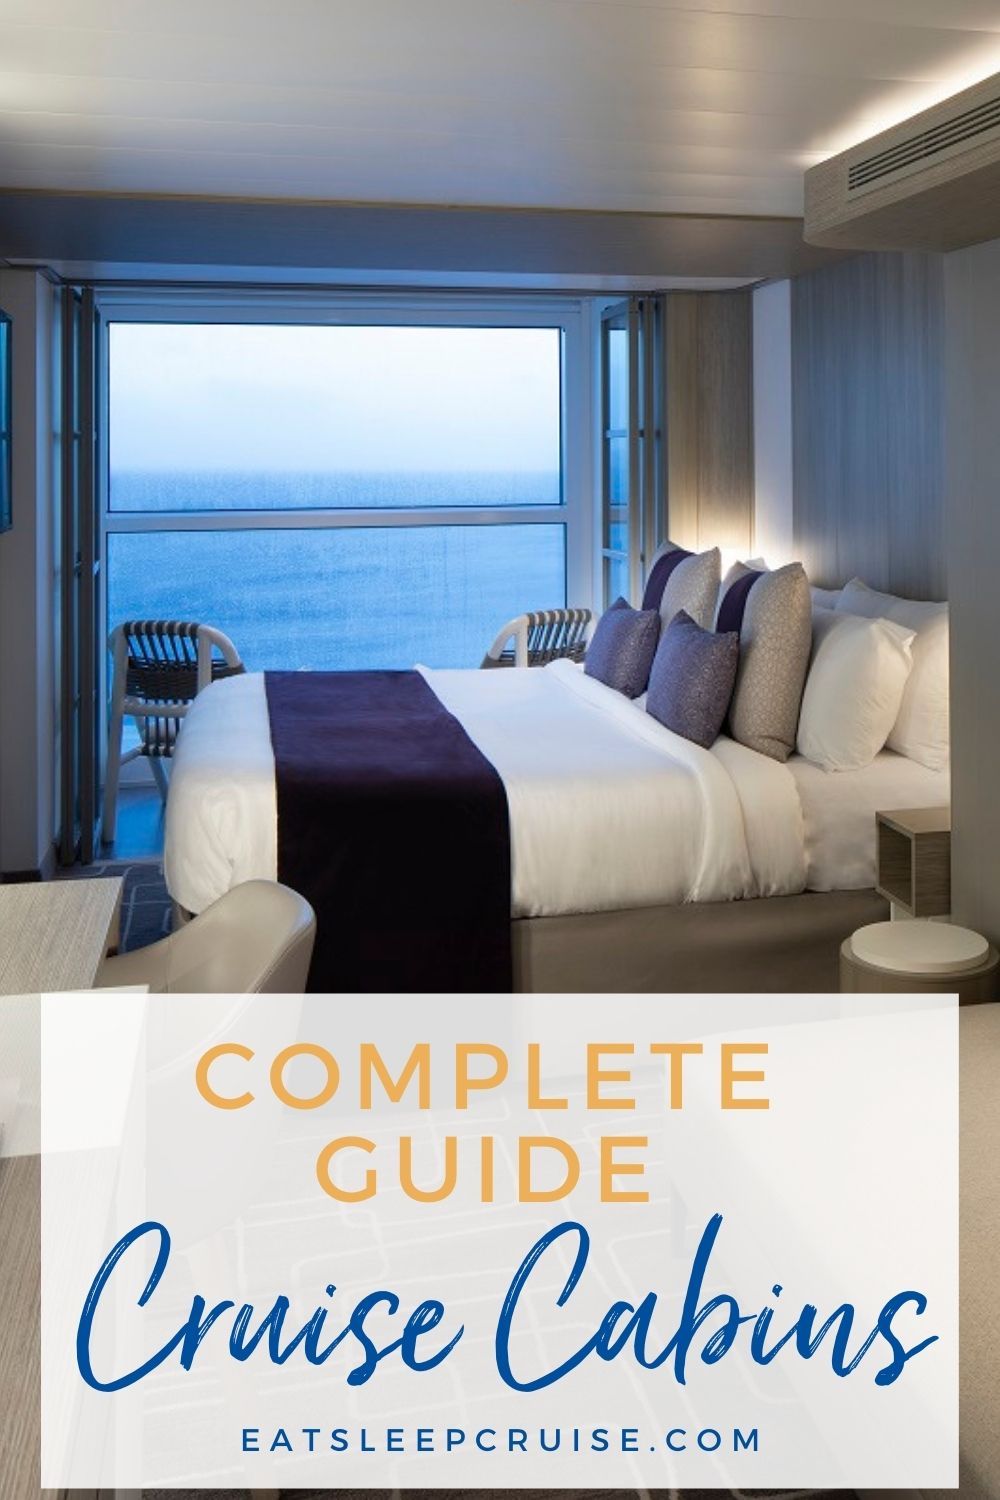 Complete Guide to Cruise Cabins